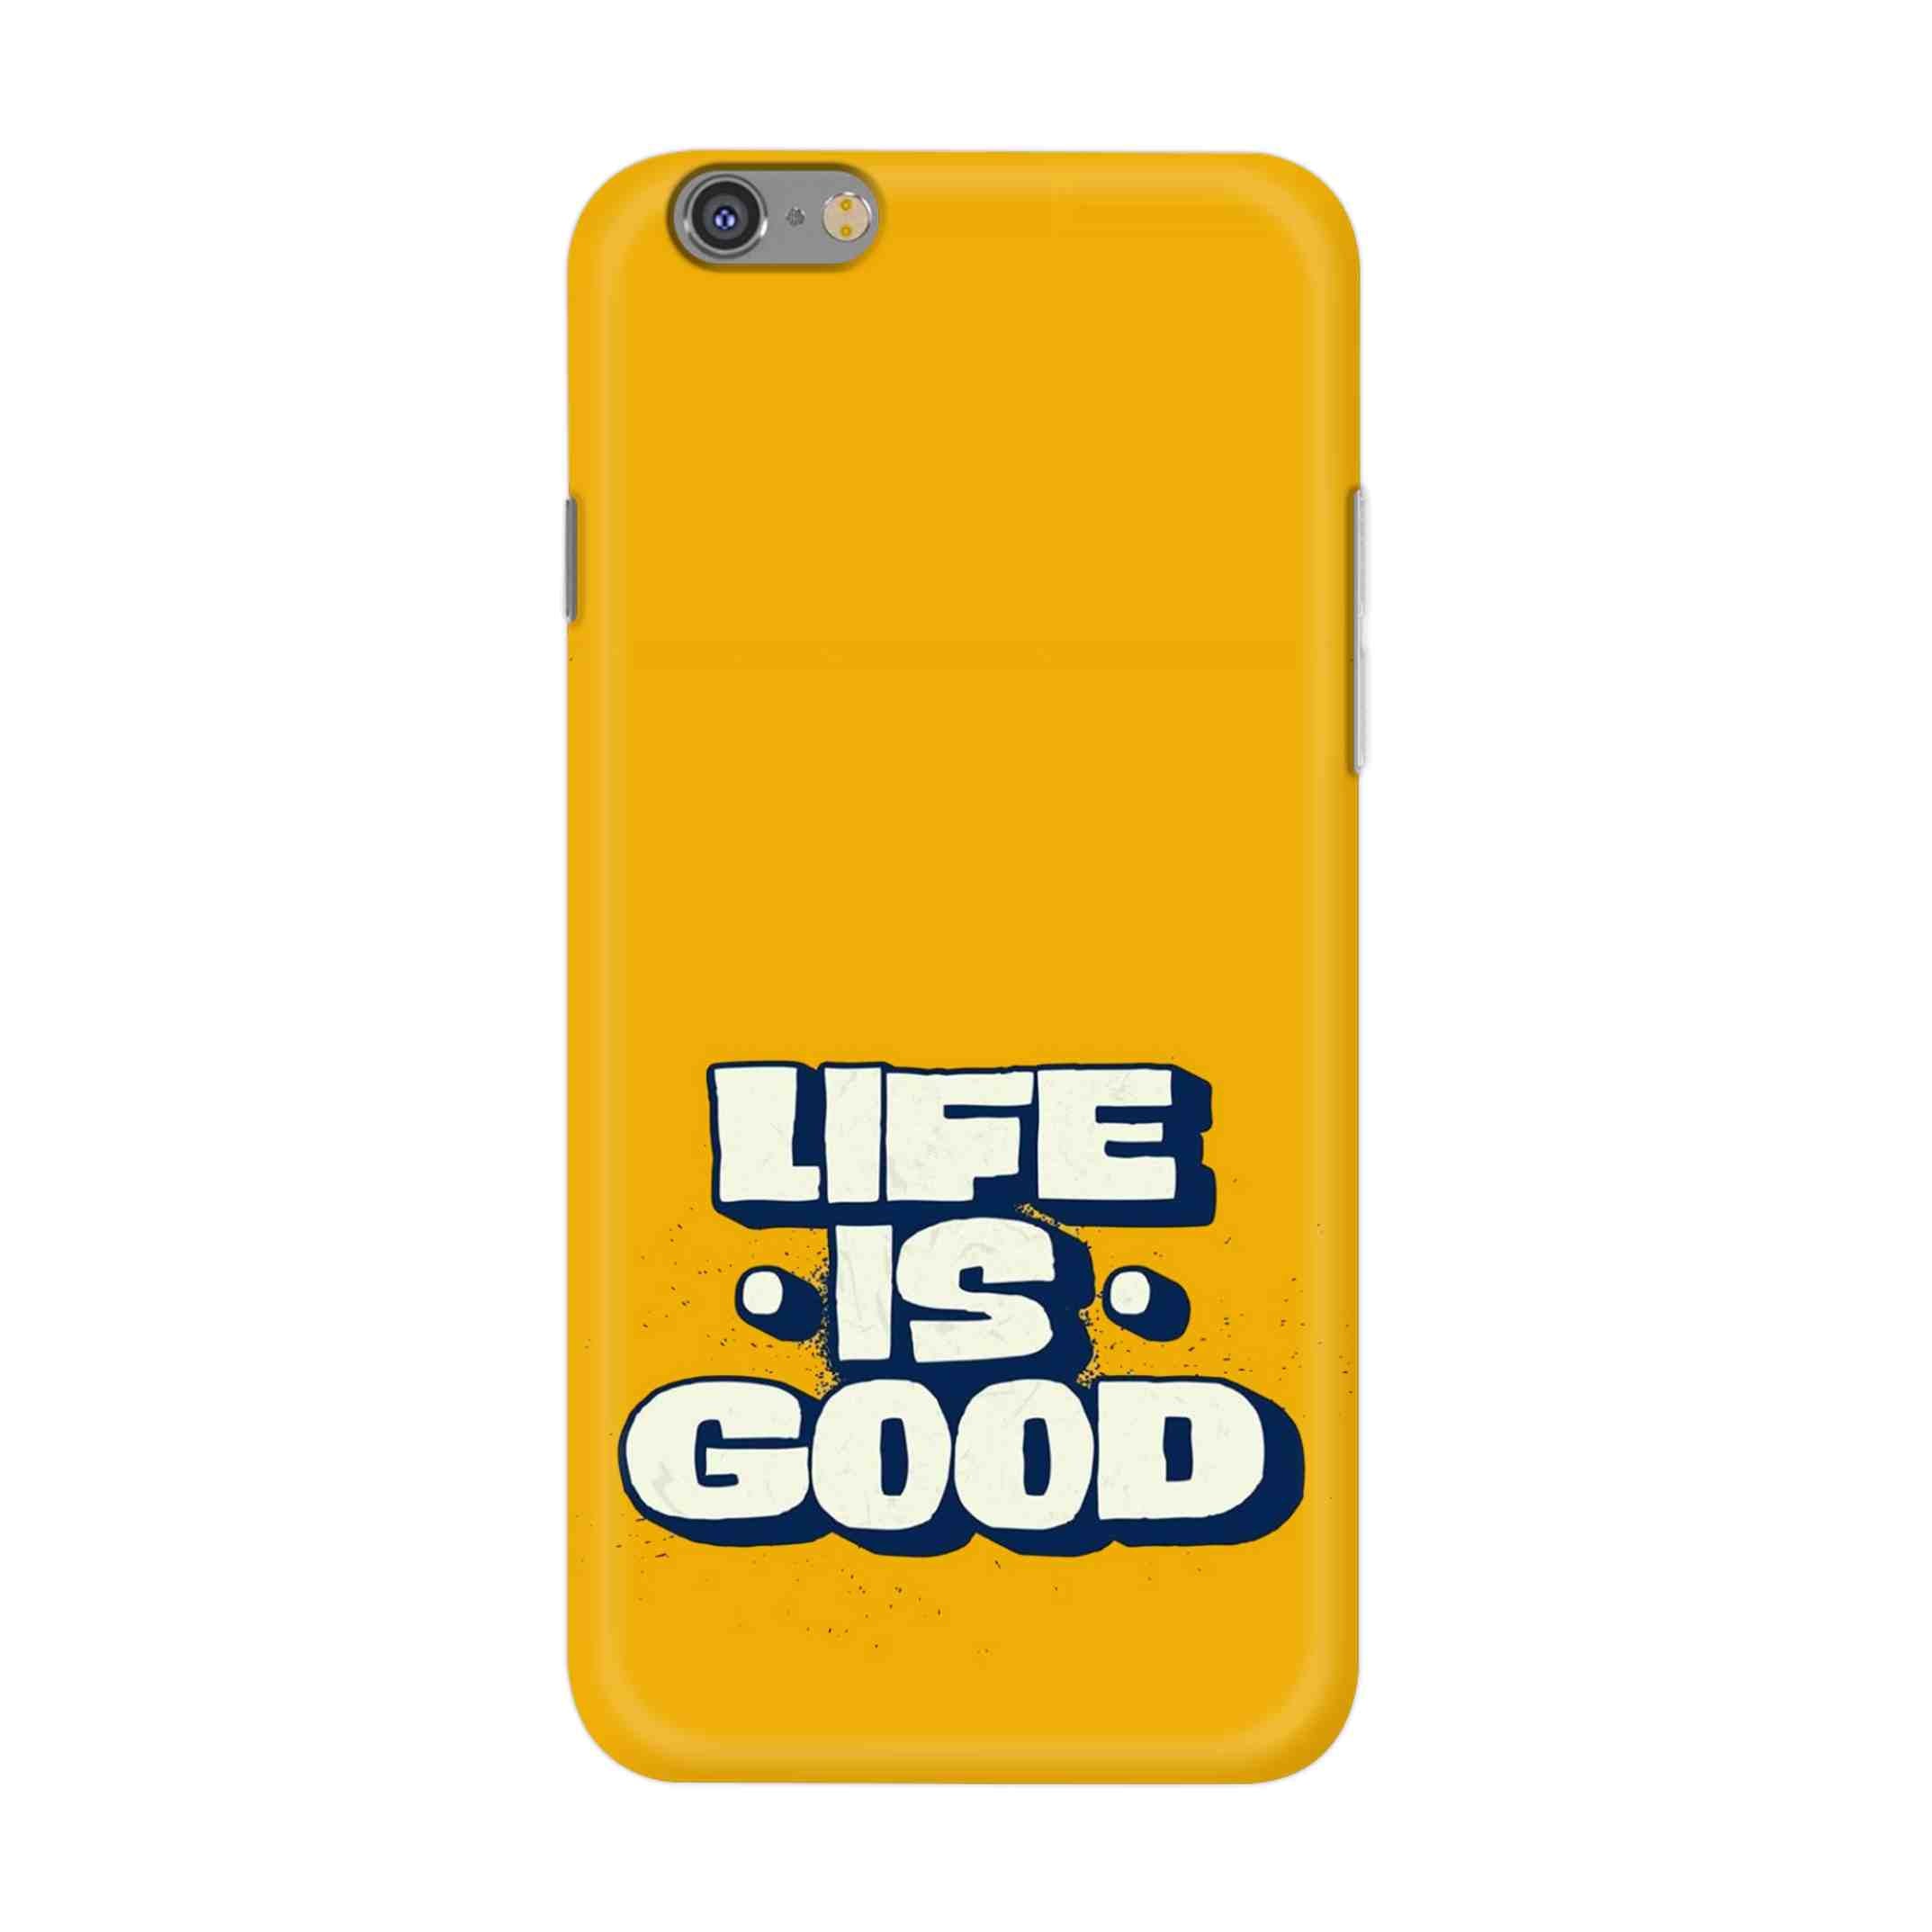 Buy Life Is Good Hard Back Mobile Phone Case/Cover For iPhone 6 / 6s Online